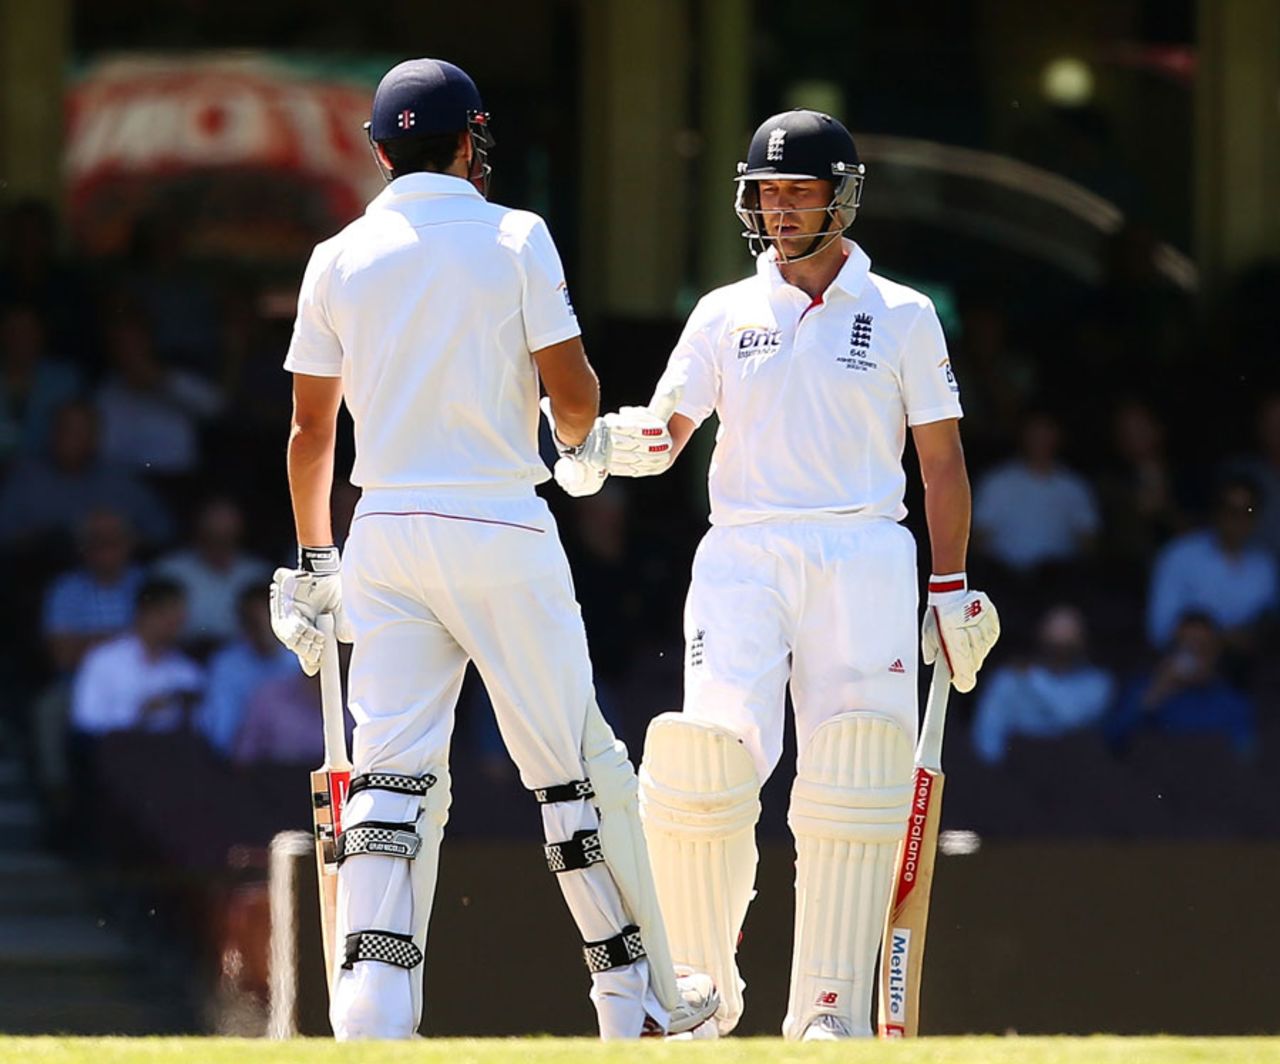 Alastair Cook and Jonathan Trott put on 143 for the second wicket, Cricket Australia Invitational XI v England, Sydney, 2nd day, November 14, 2013